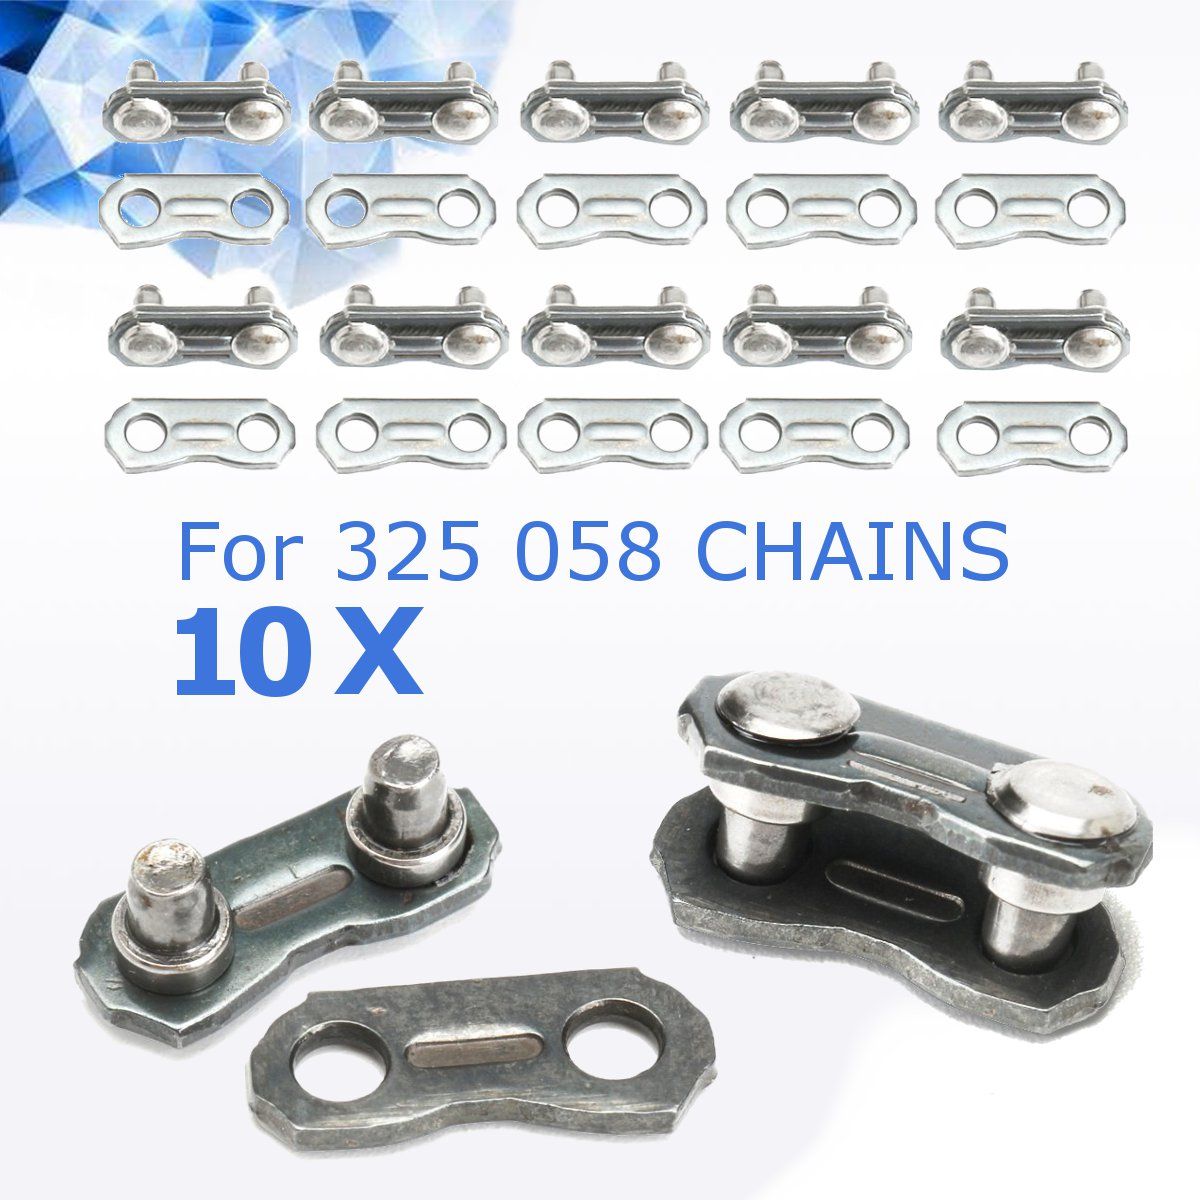 Portable-Drive-Link-Chain-Saw-Mill-Chain-Chain-Saw-Connector-for-Smooth-Cutting-Blade-Tools-1233437